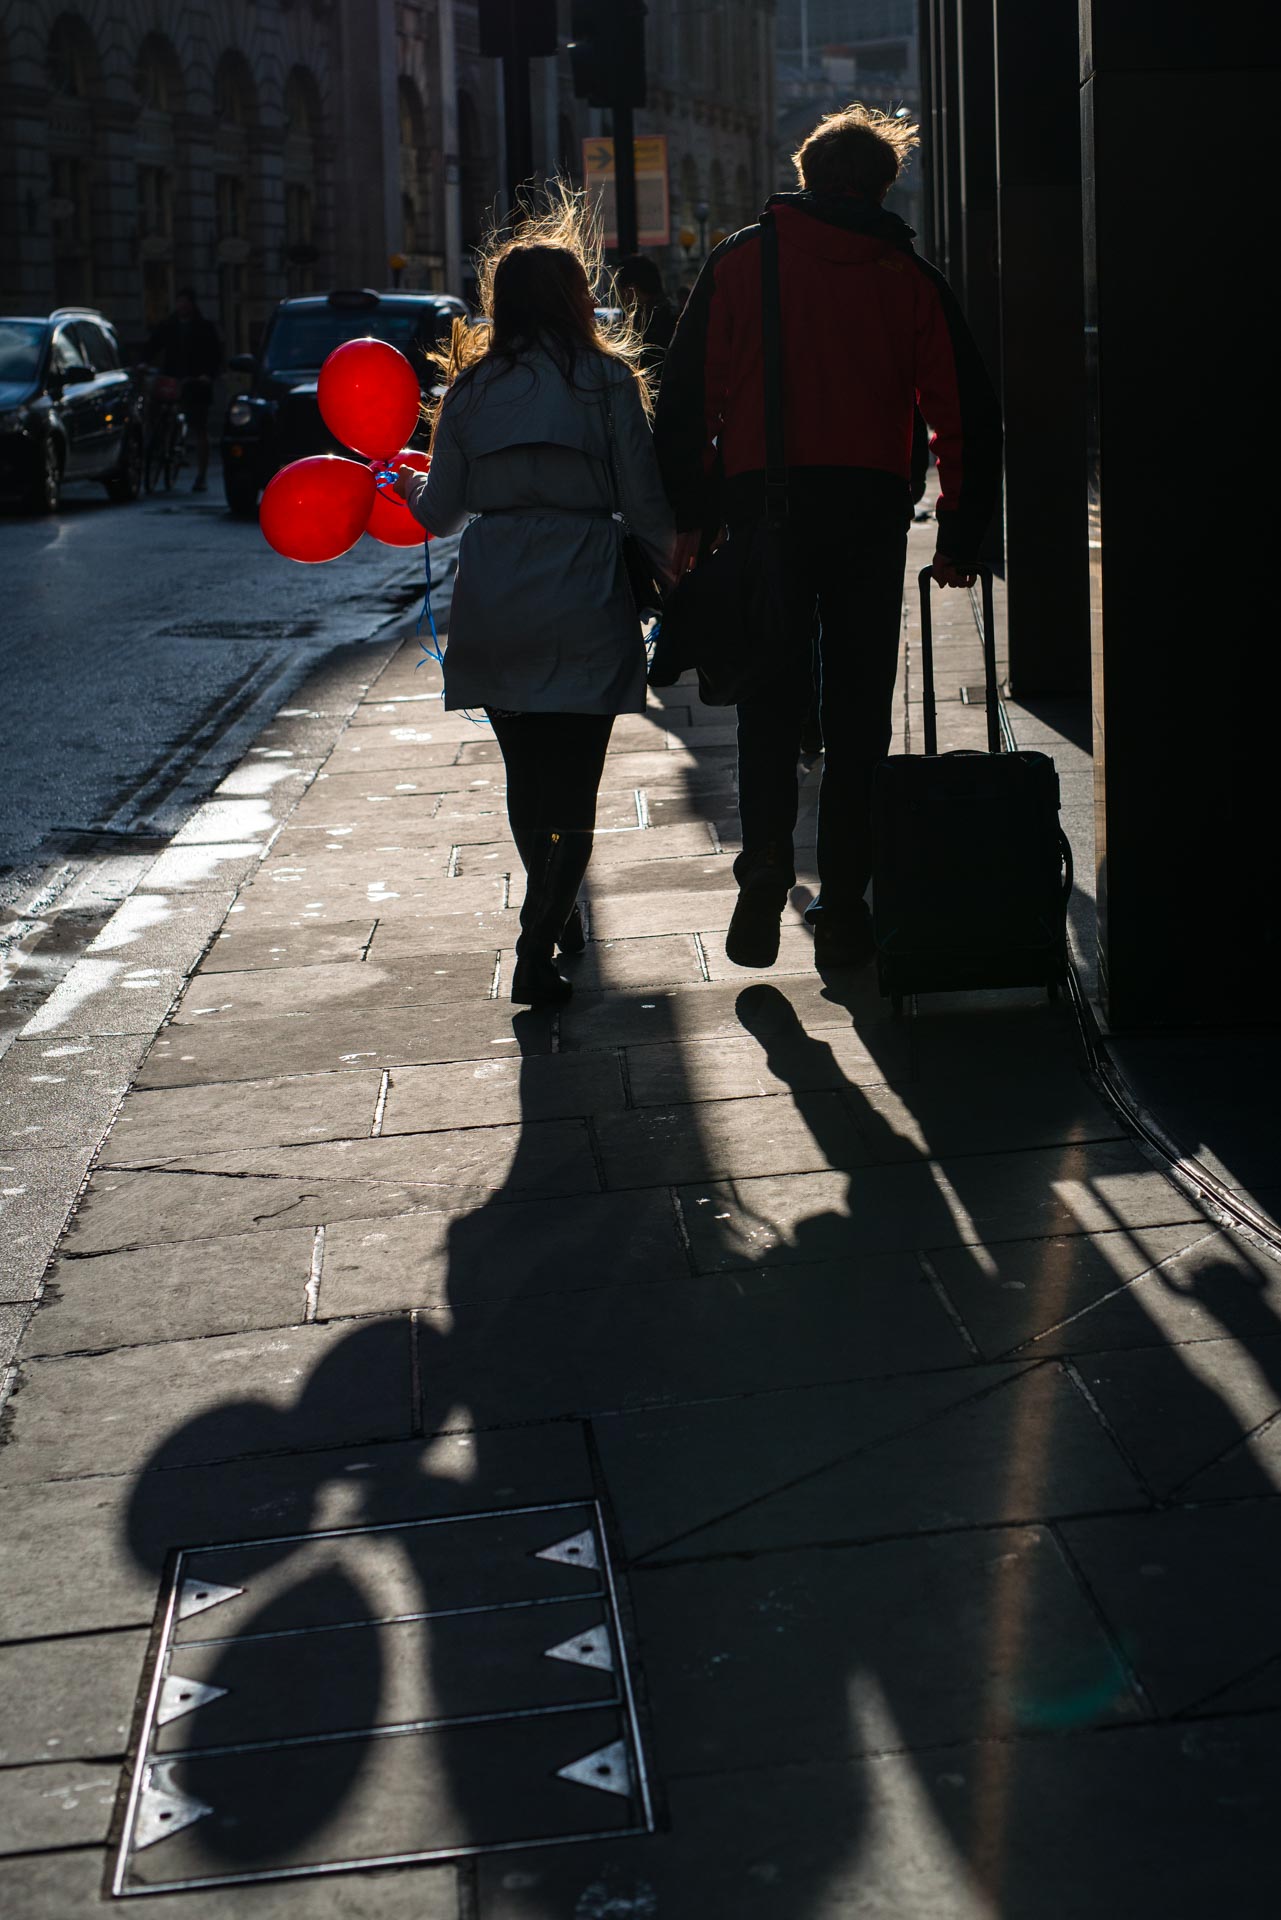 Contrast and balloons